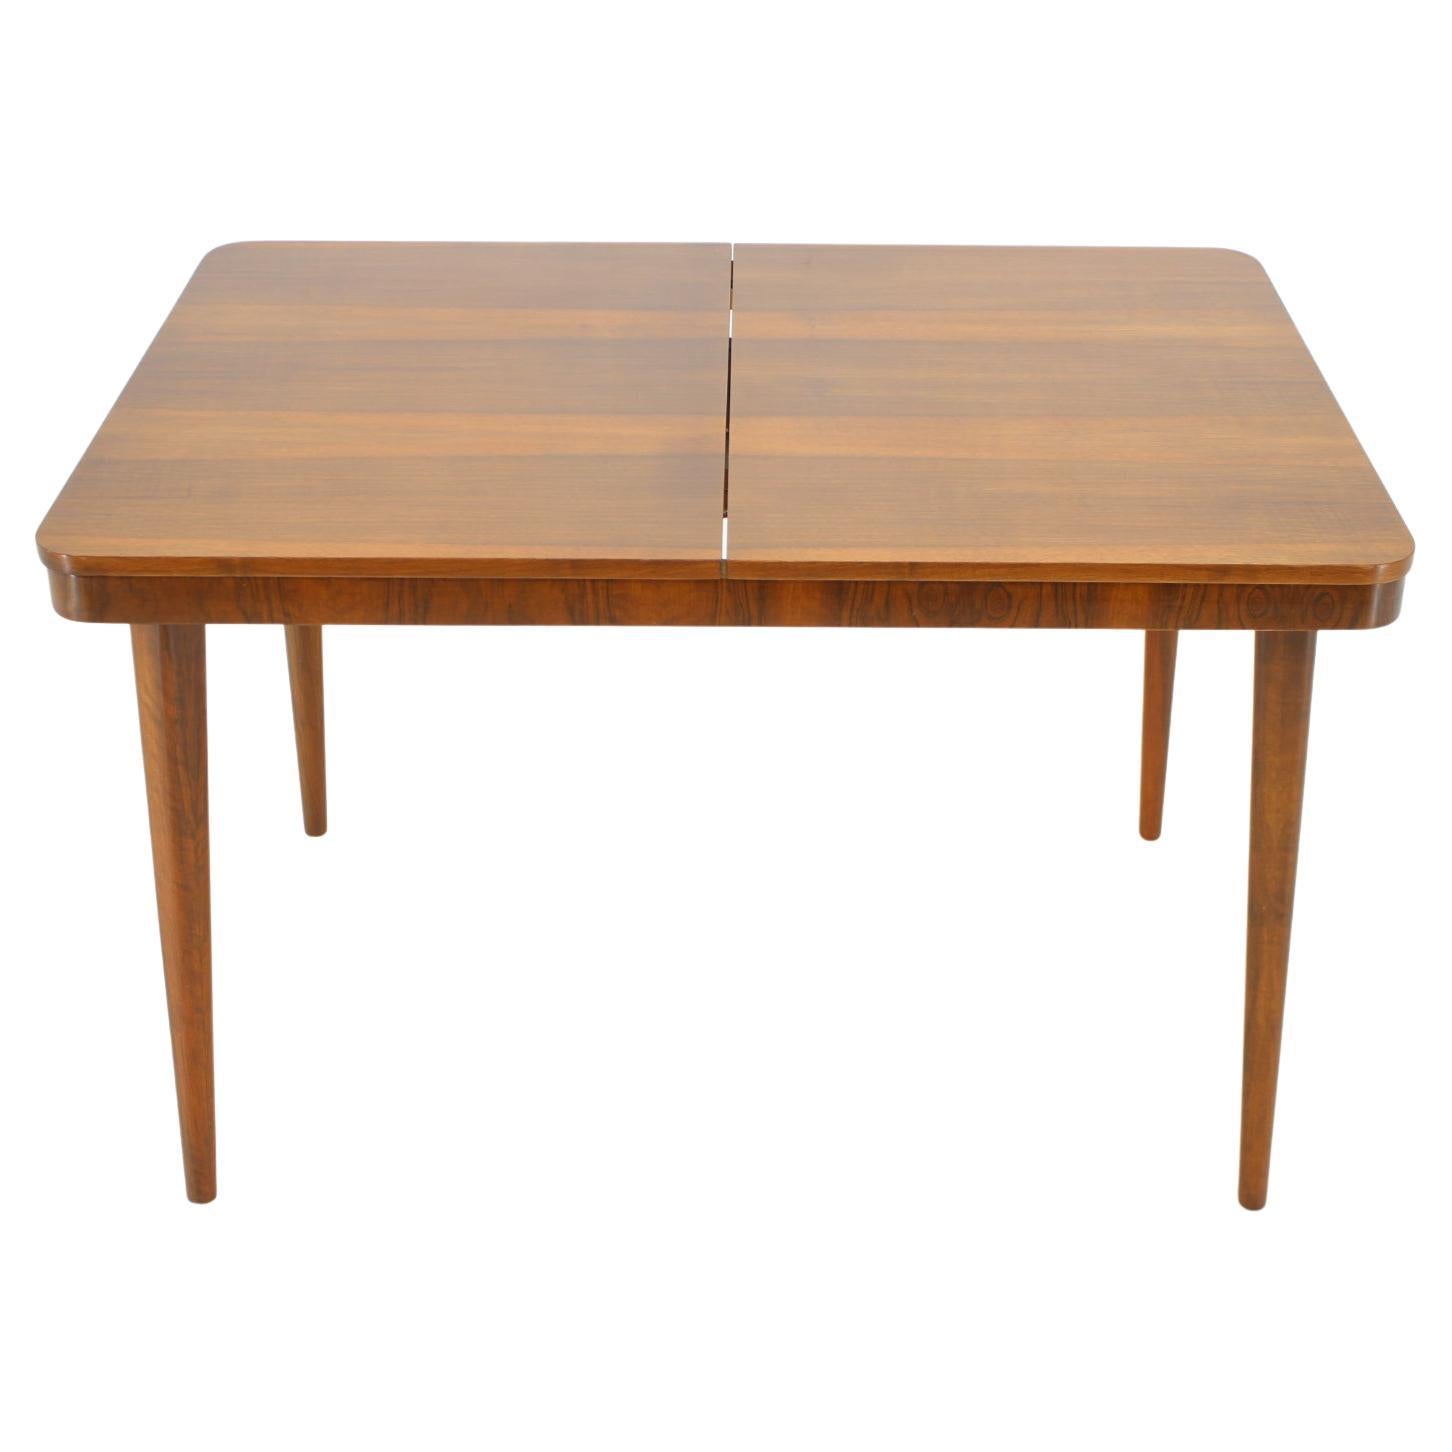 1950s Extendable Dining Table in Walnut by UP zavody, Czechoslovakia For Sale